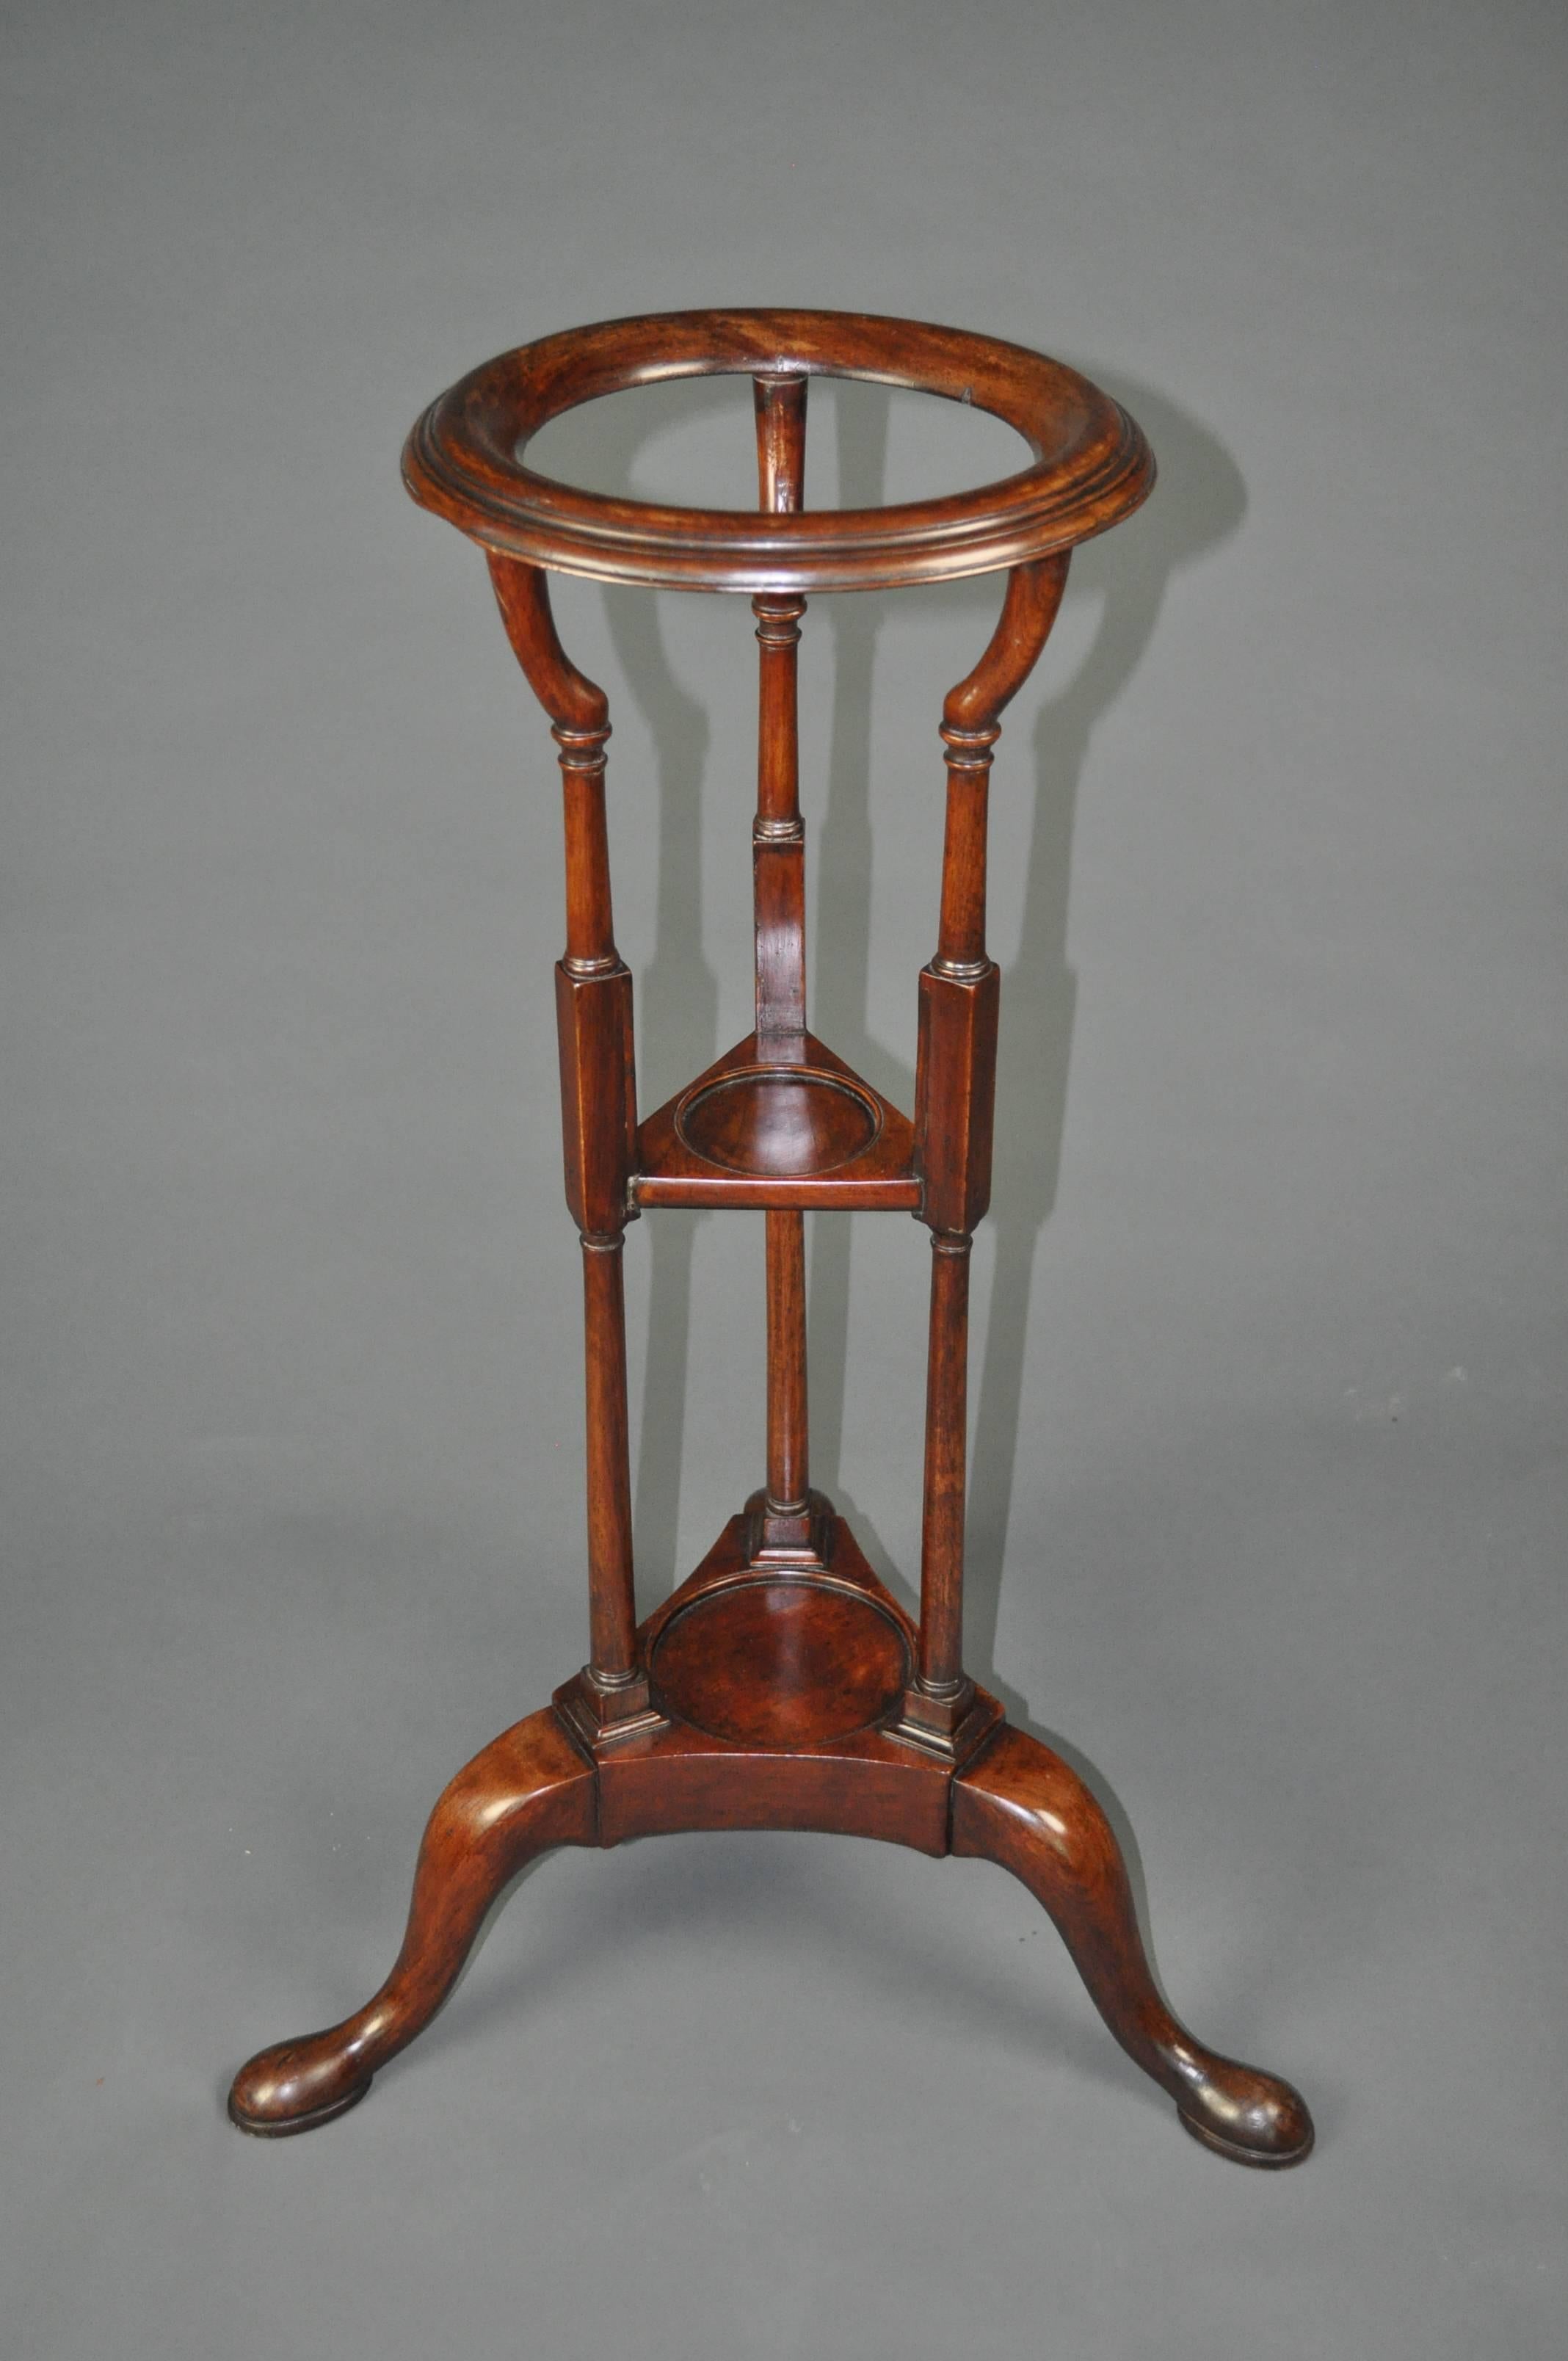 An 18th century mahogany basin Stand, with circular top supported on three slender turned columns with shelves below for a cup and a jug, and raised on an attractive tripod base with cabriole legs and pad feet. Measures: 11 inches diameter at